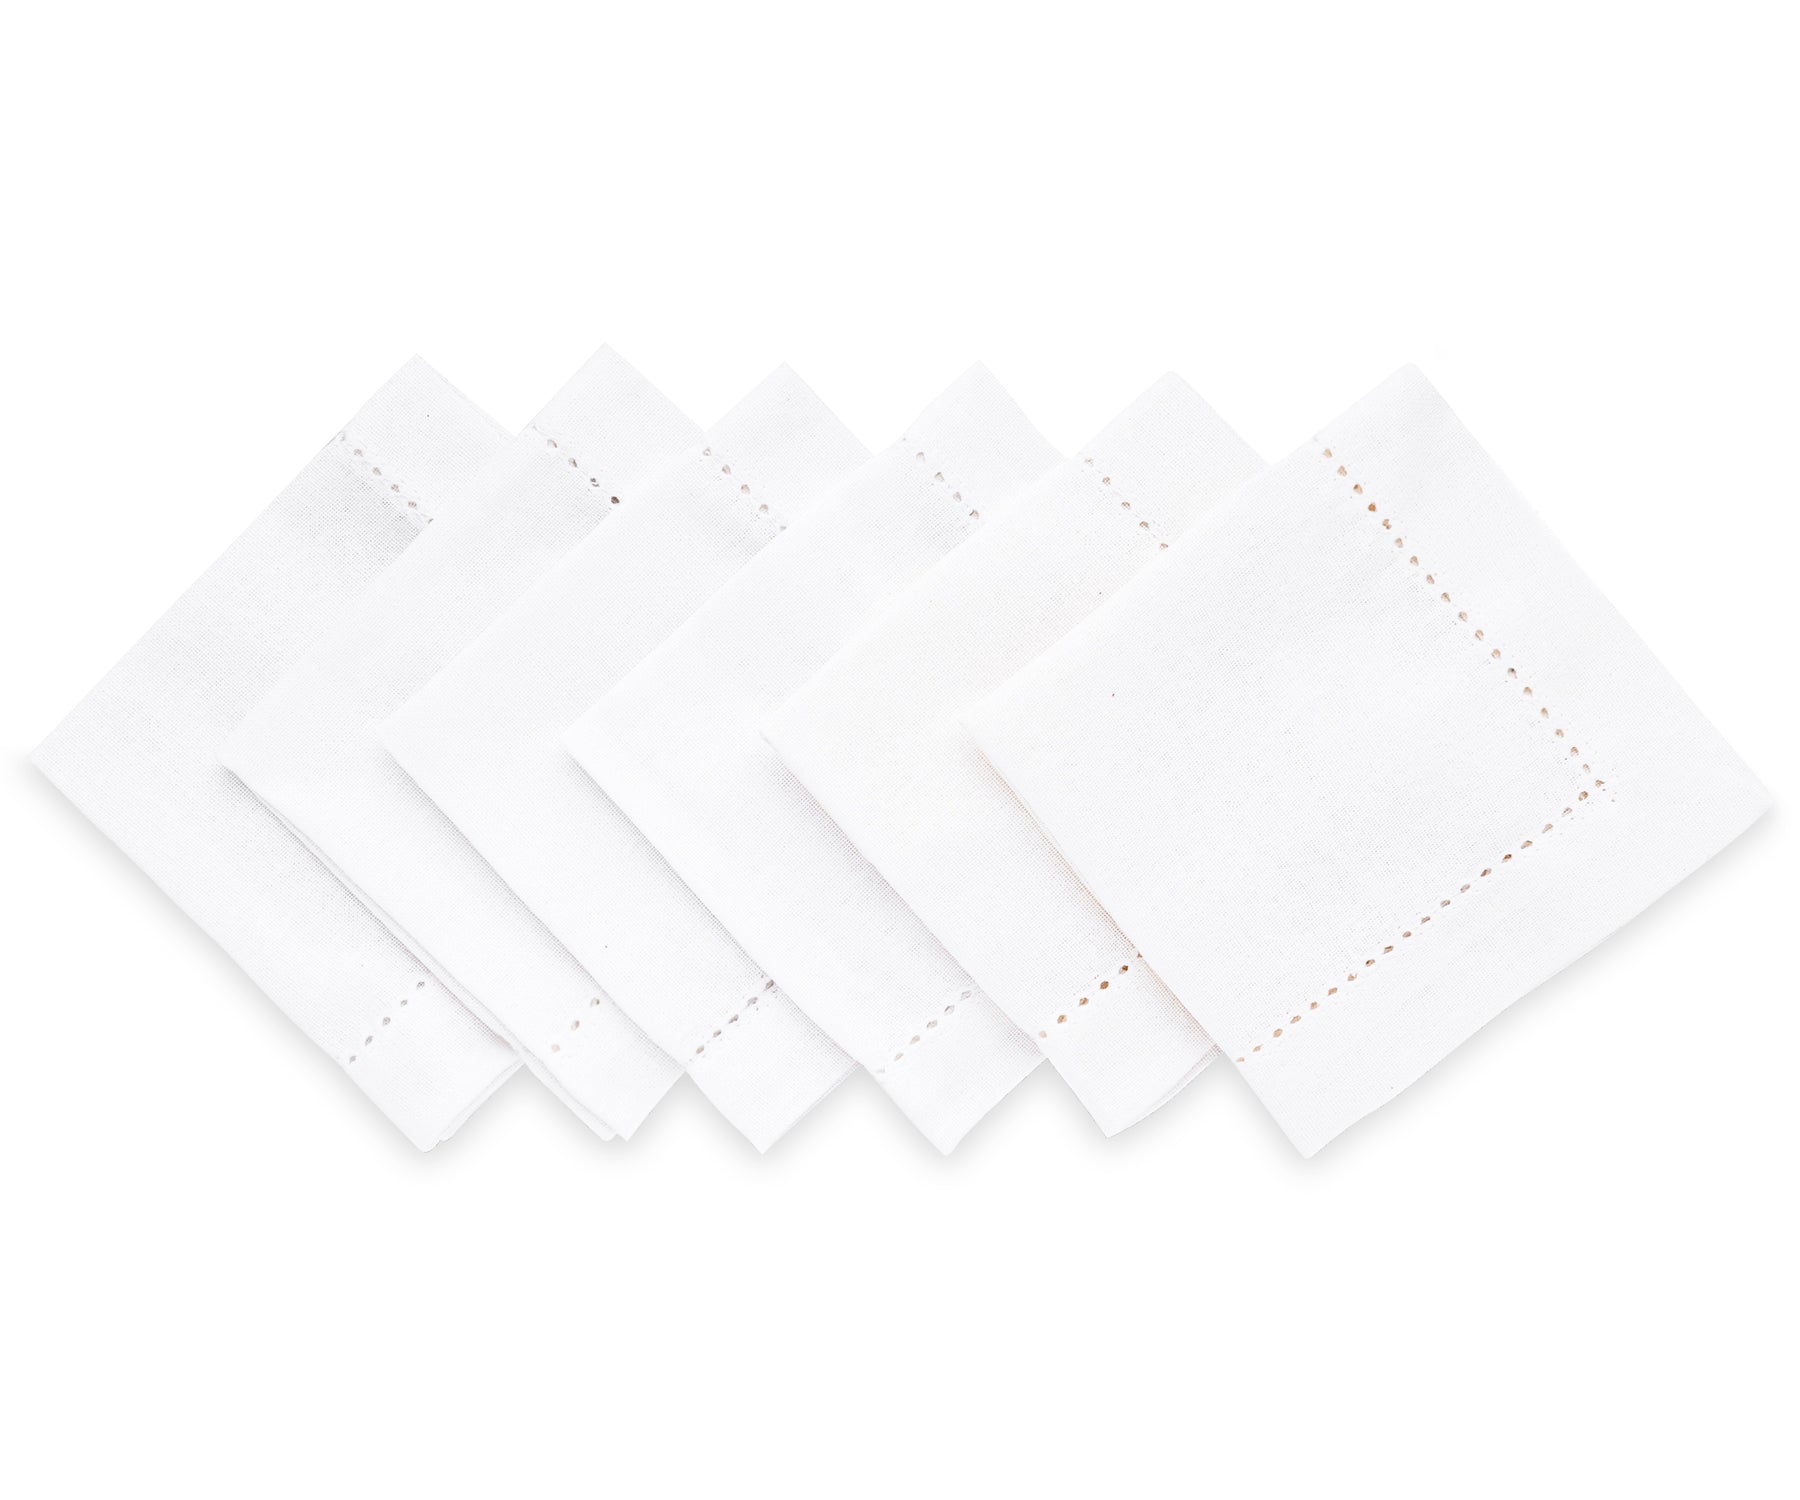 Enhance your dining experience with quality Restaurant Napkins.